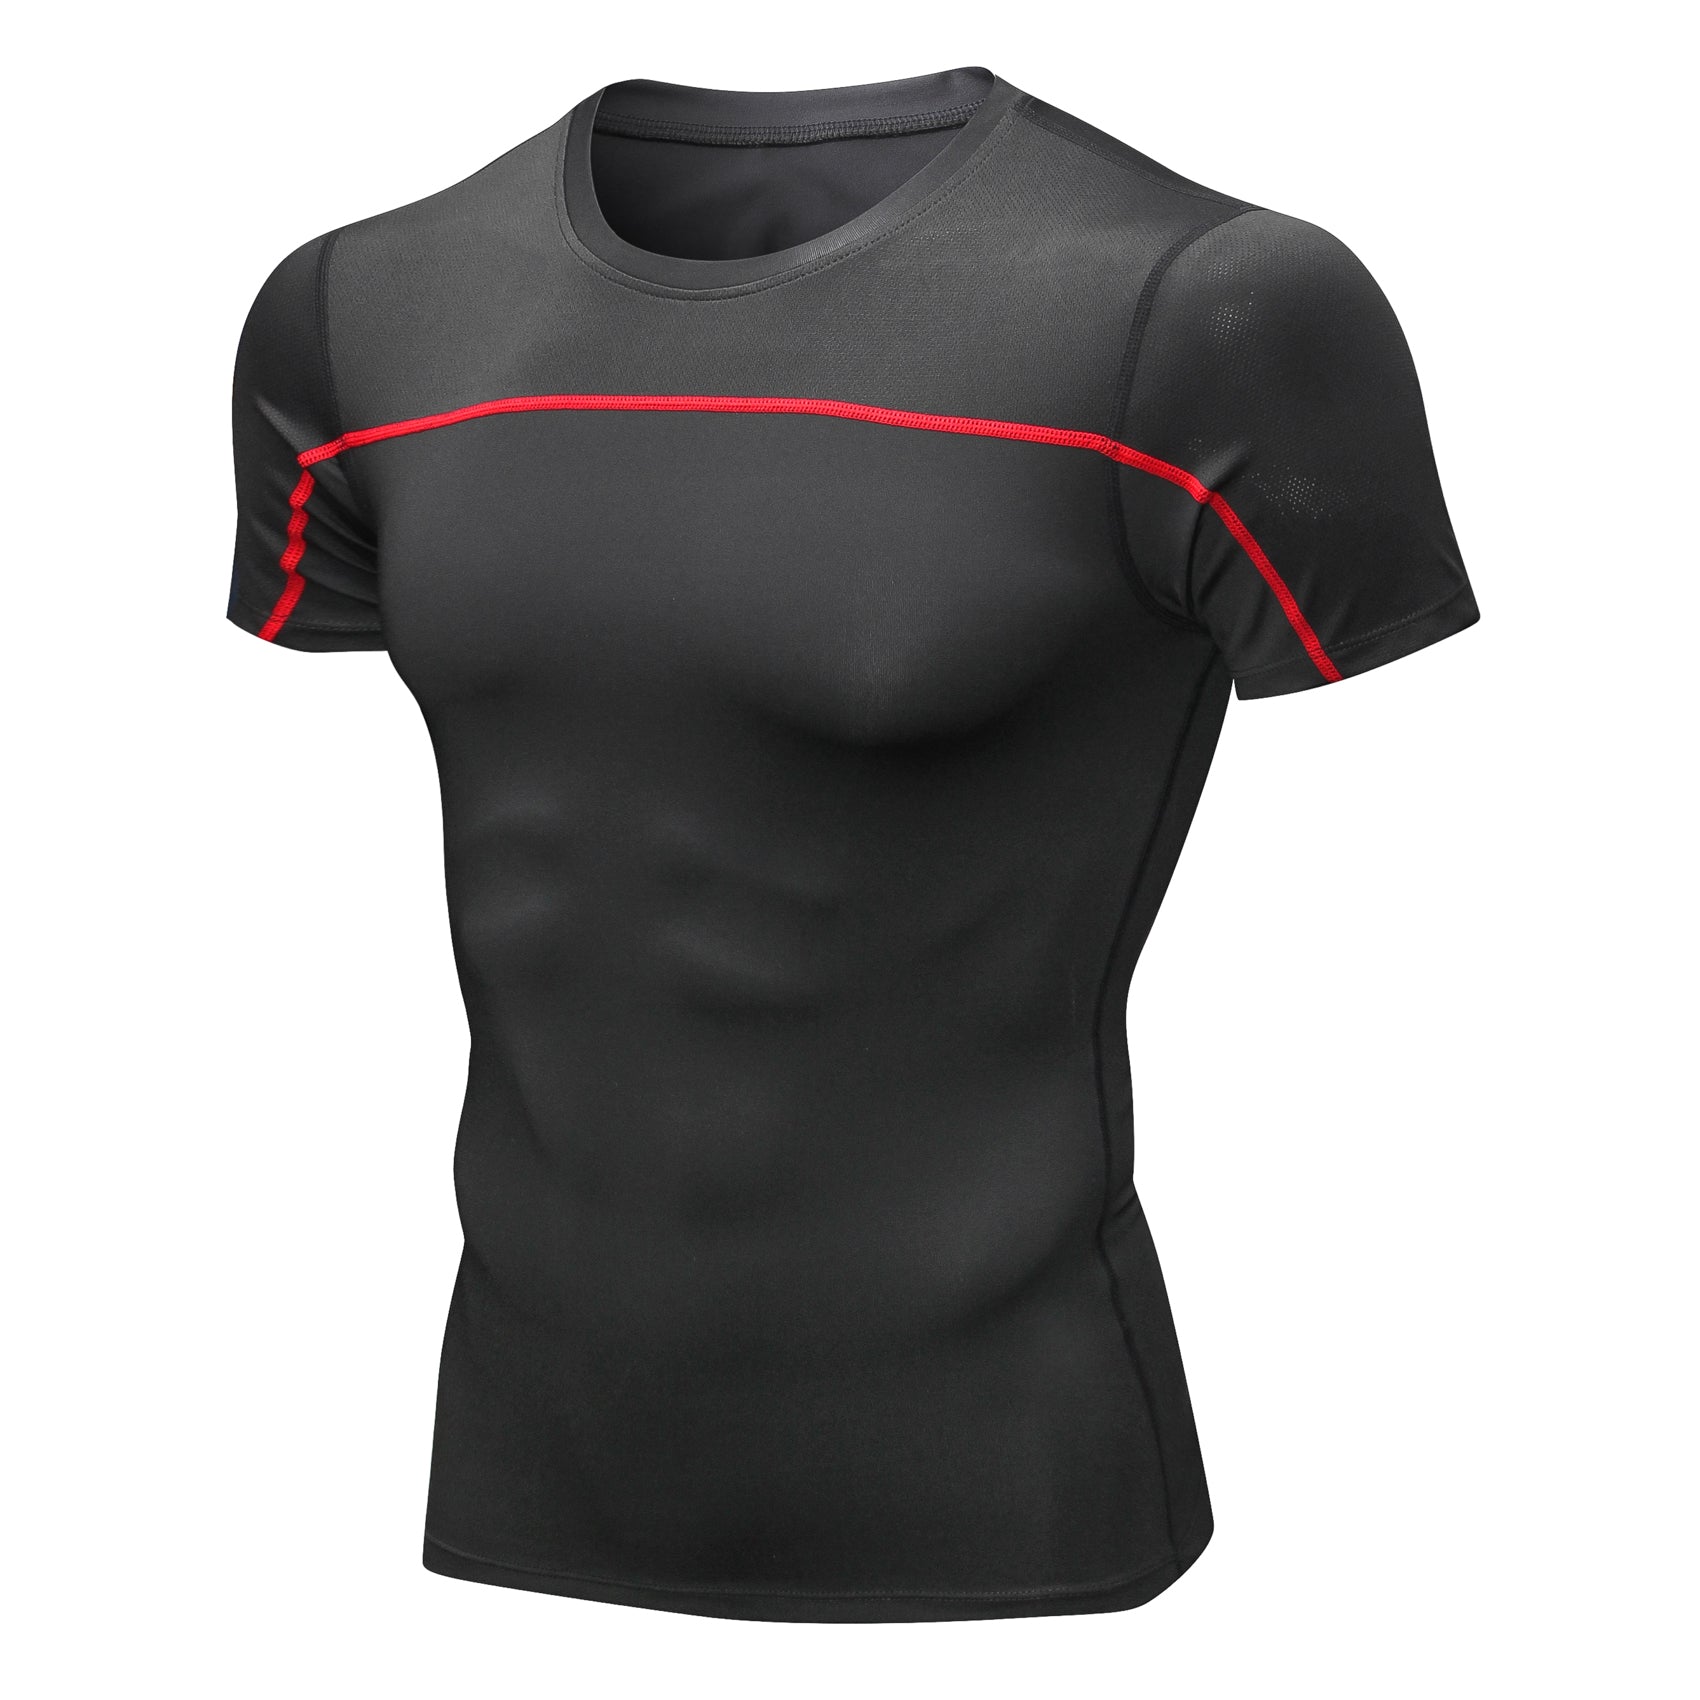 Mens Cool Quick Dry Baselayer Tops Compression Underwear T-shirts Sports Short Sleeve Tights Outdoor Fitness Shirts LANBAOSI